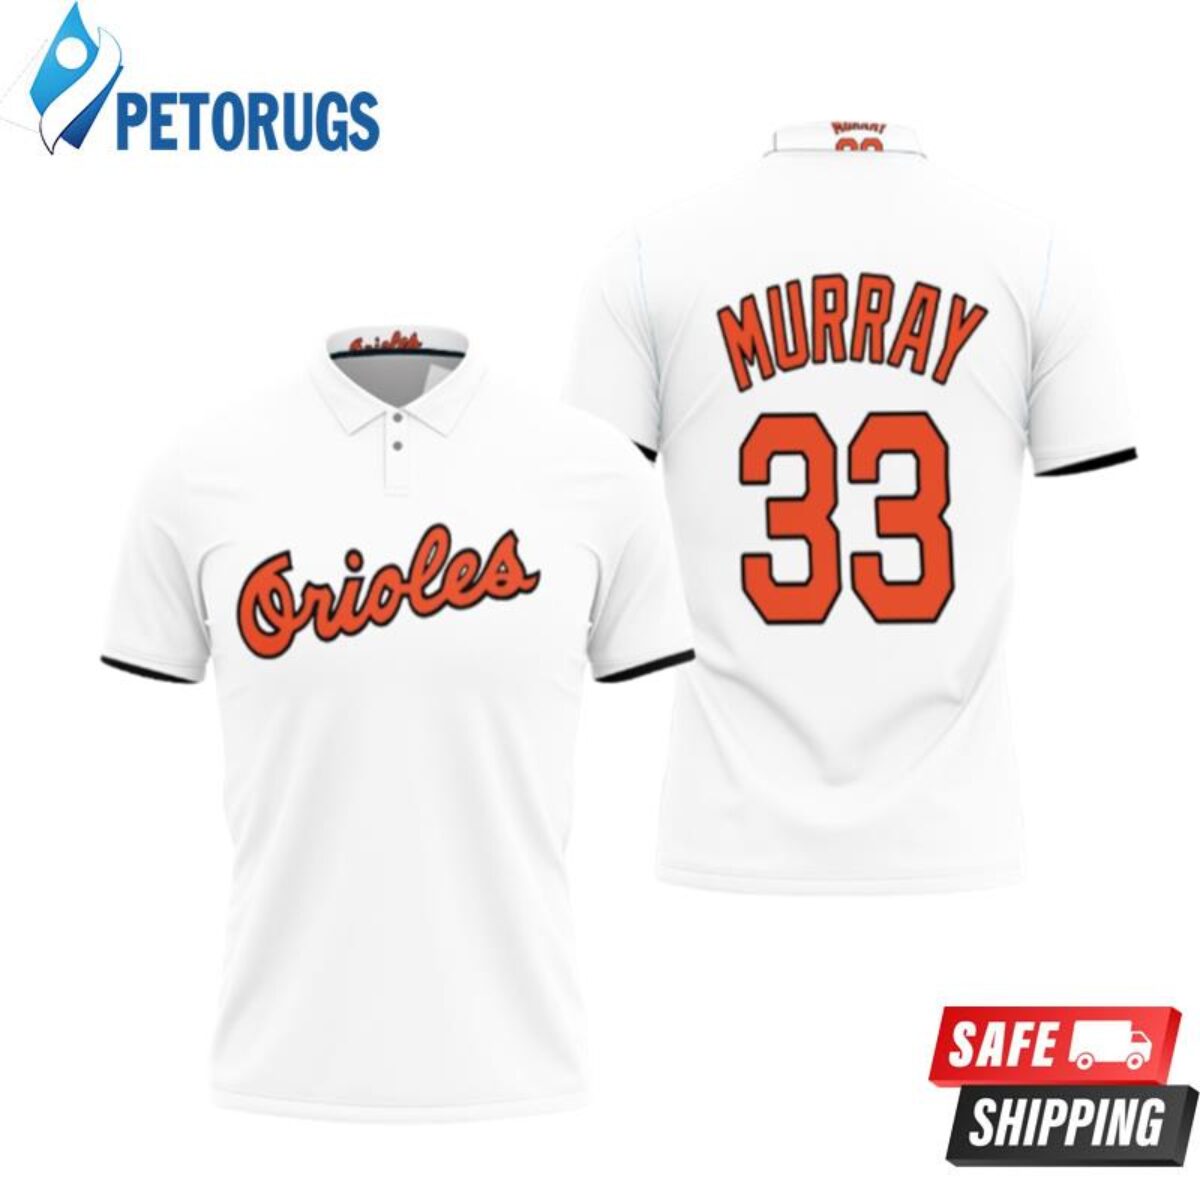 Baltimore Orioles Eddie Murray #33 Mlb Mitchell Ness 1985 Cooperstown  Collection Mesh White 2019 Polo Shirts - Peto Rugs